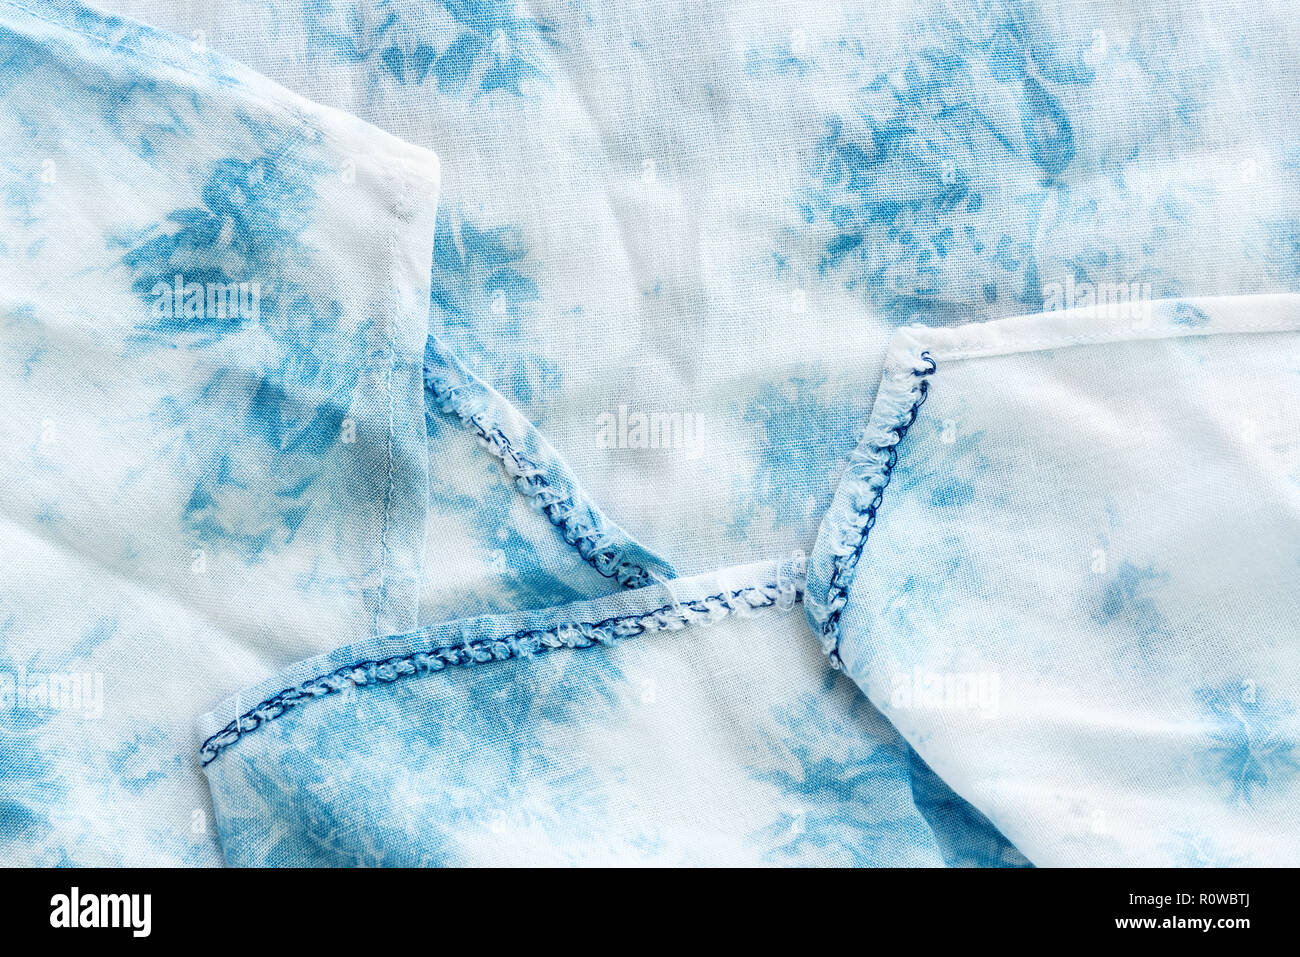 Texture of white and blue soft fabric on table. Abstract background. Picture for add text message. Backdrop for design art work. Stock Photo